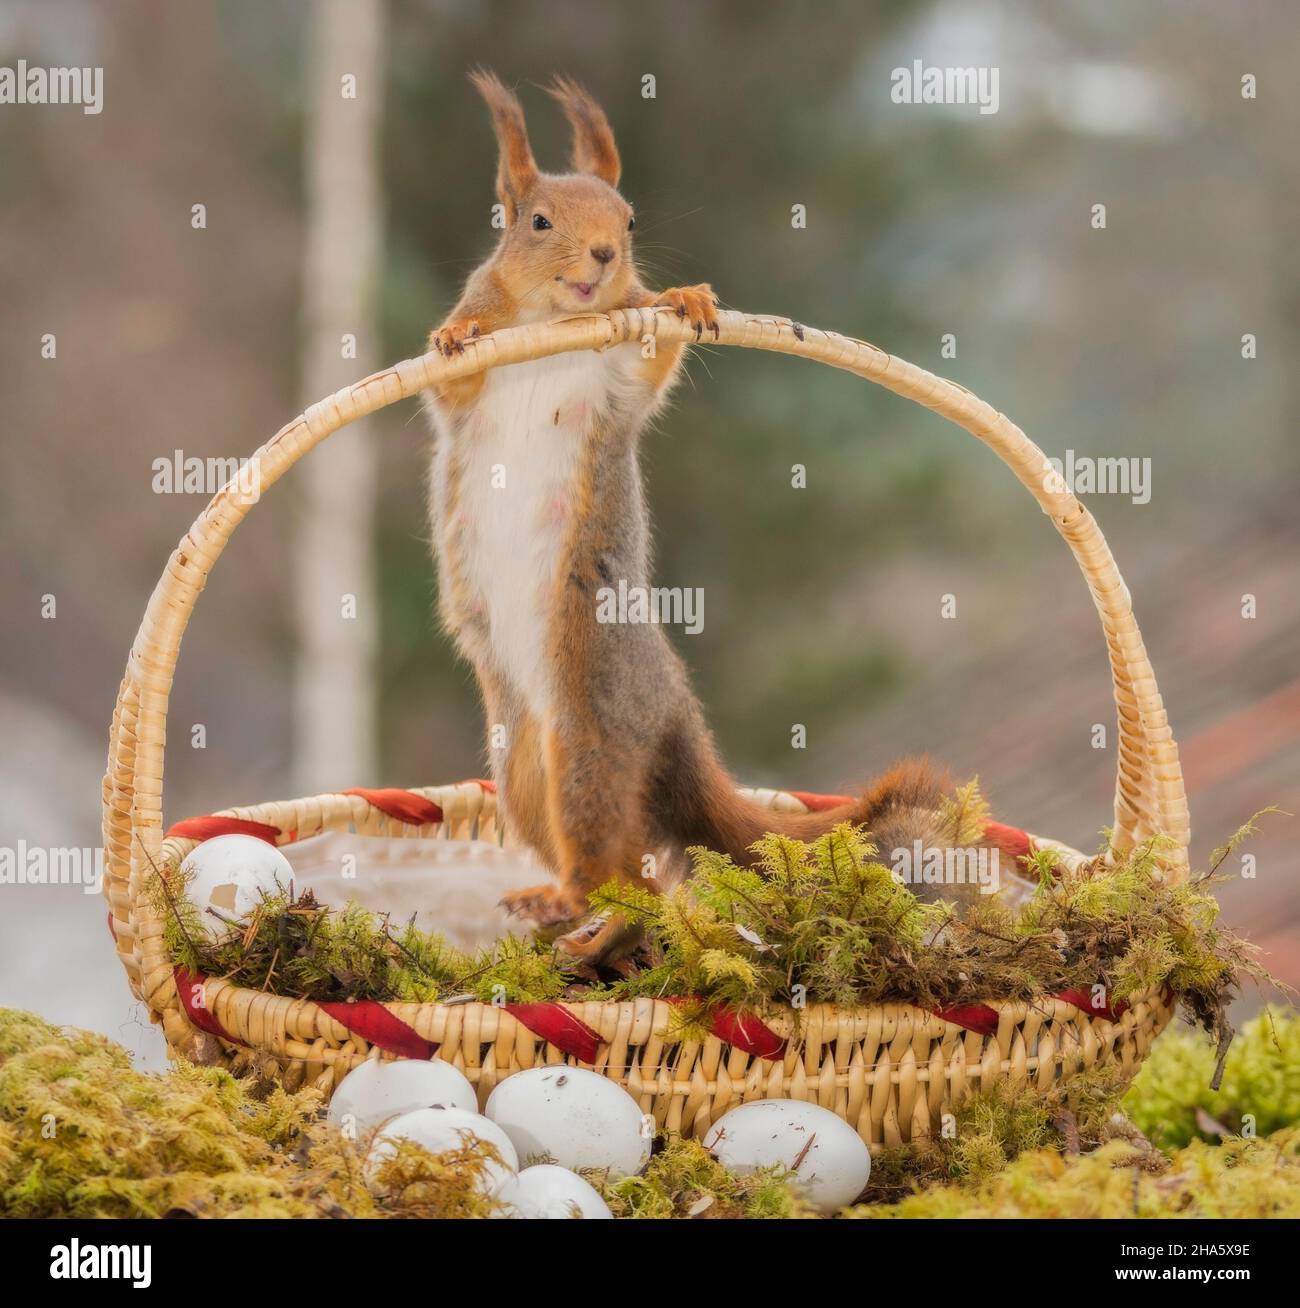 close up of a red squirrel in basket and eggs with moving blurry leg Stock Photo